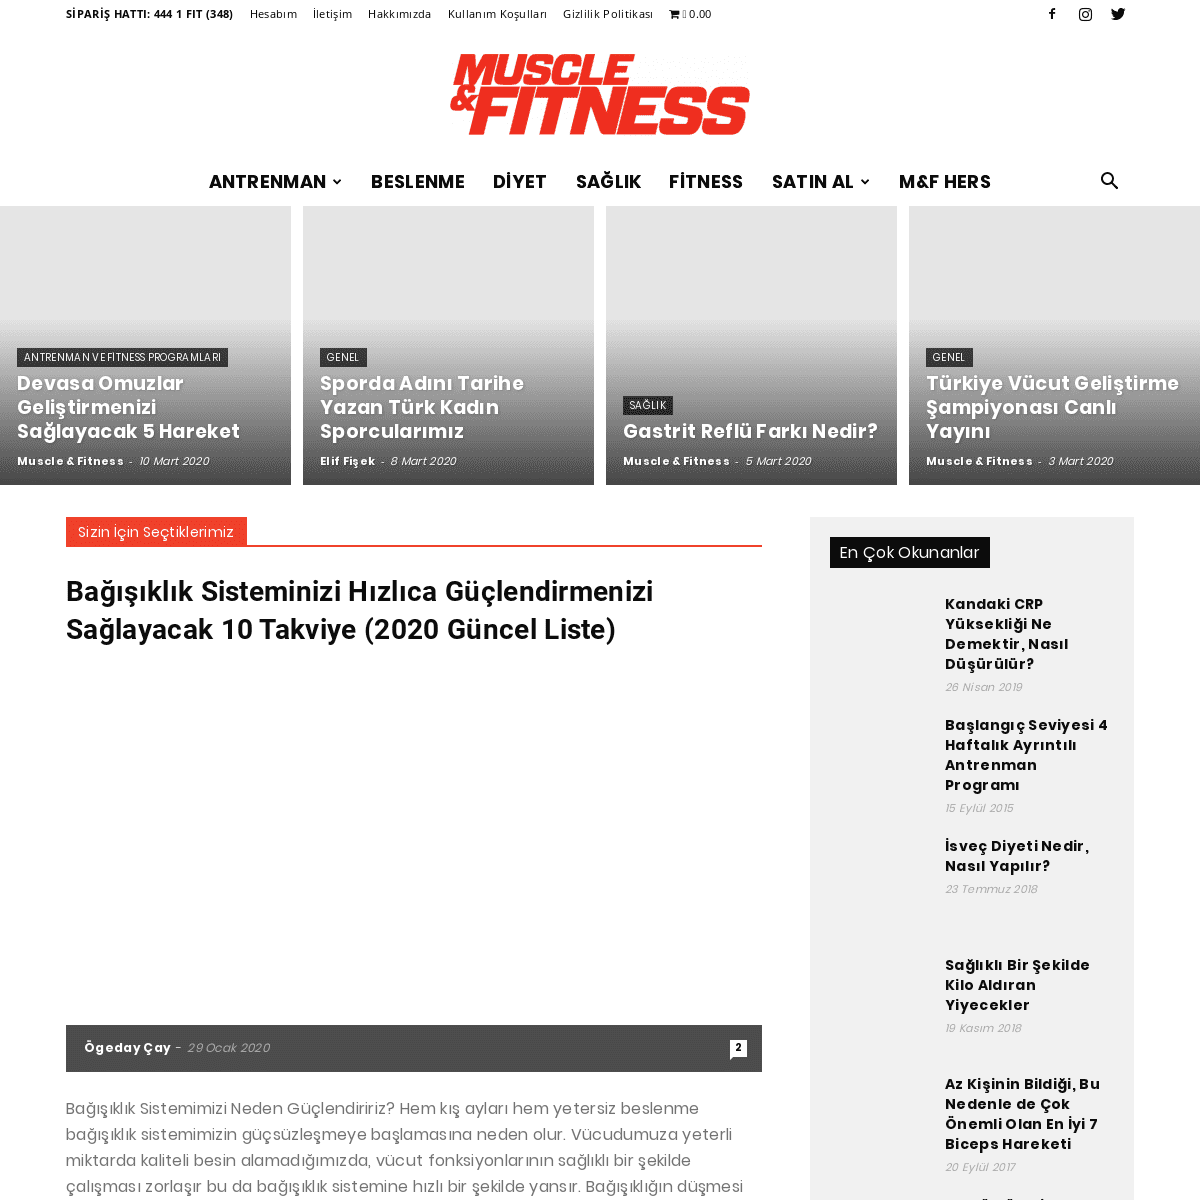 A complete backup of muscleandfitness.com.tr